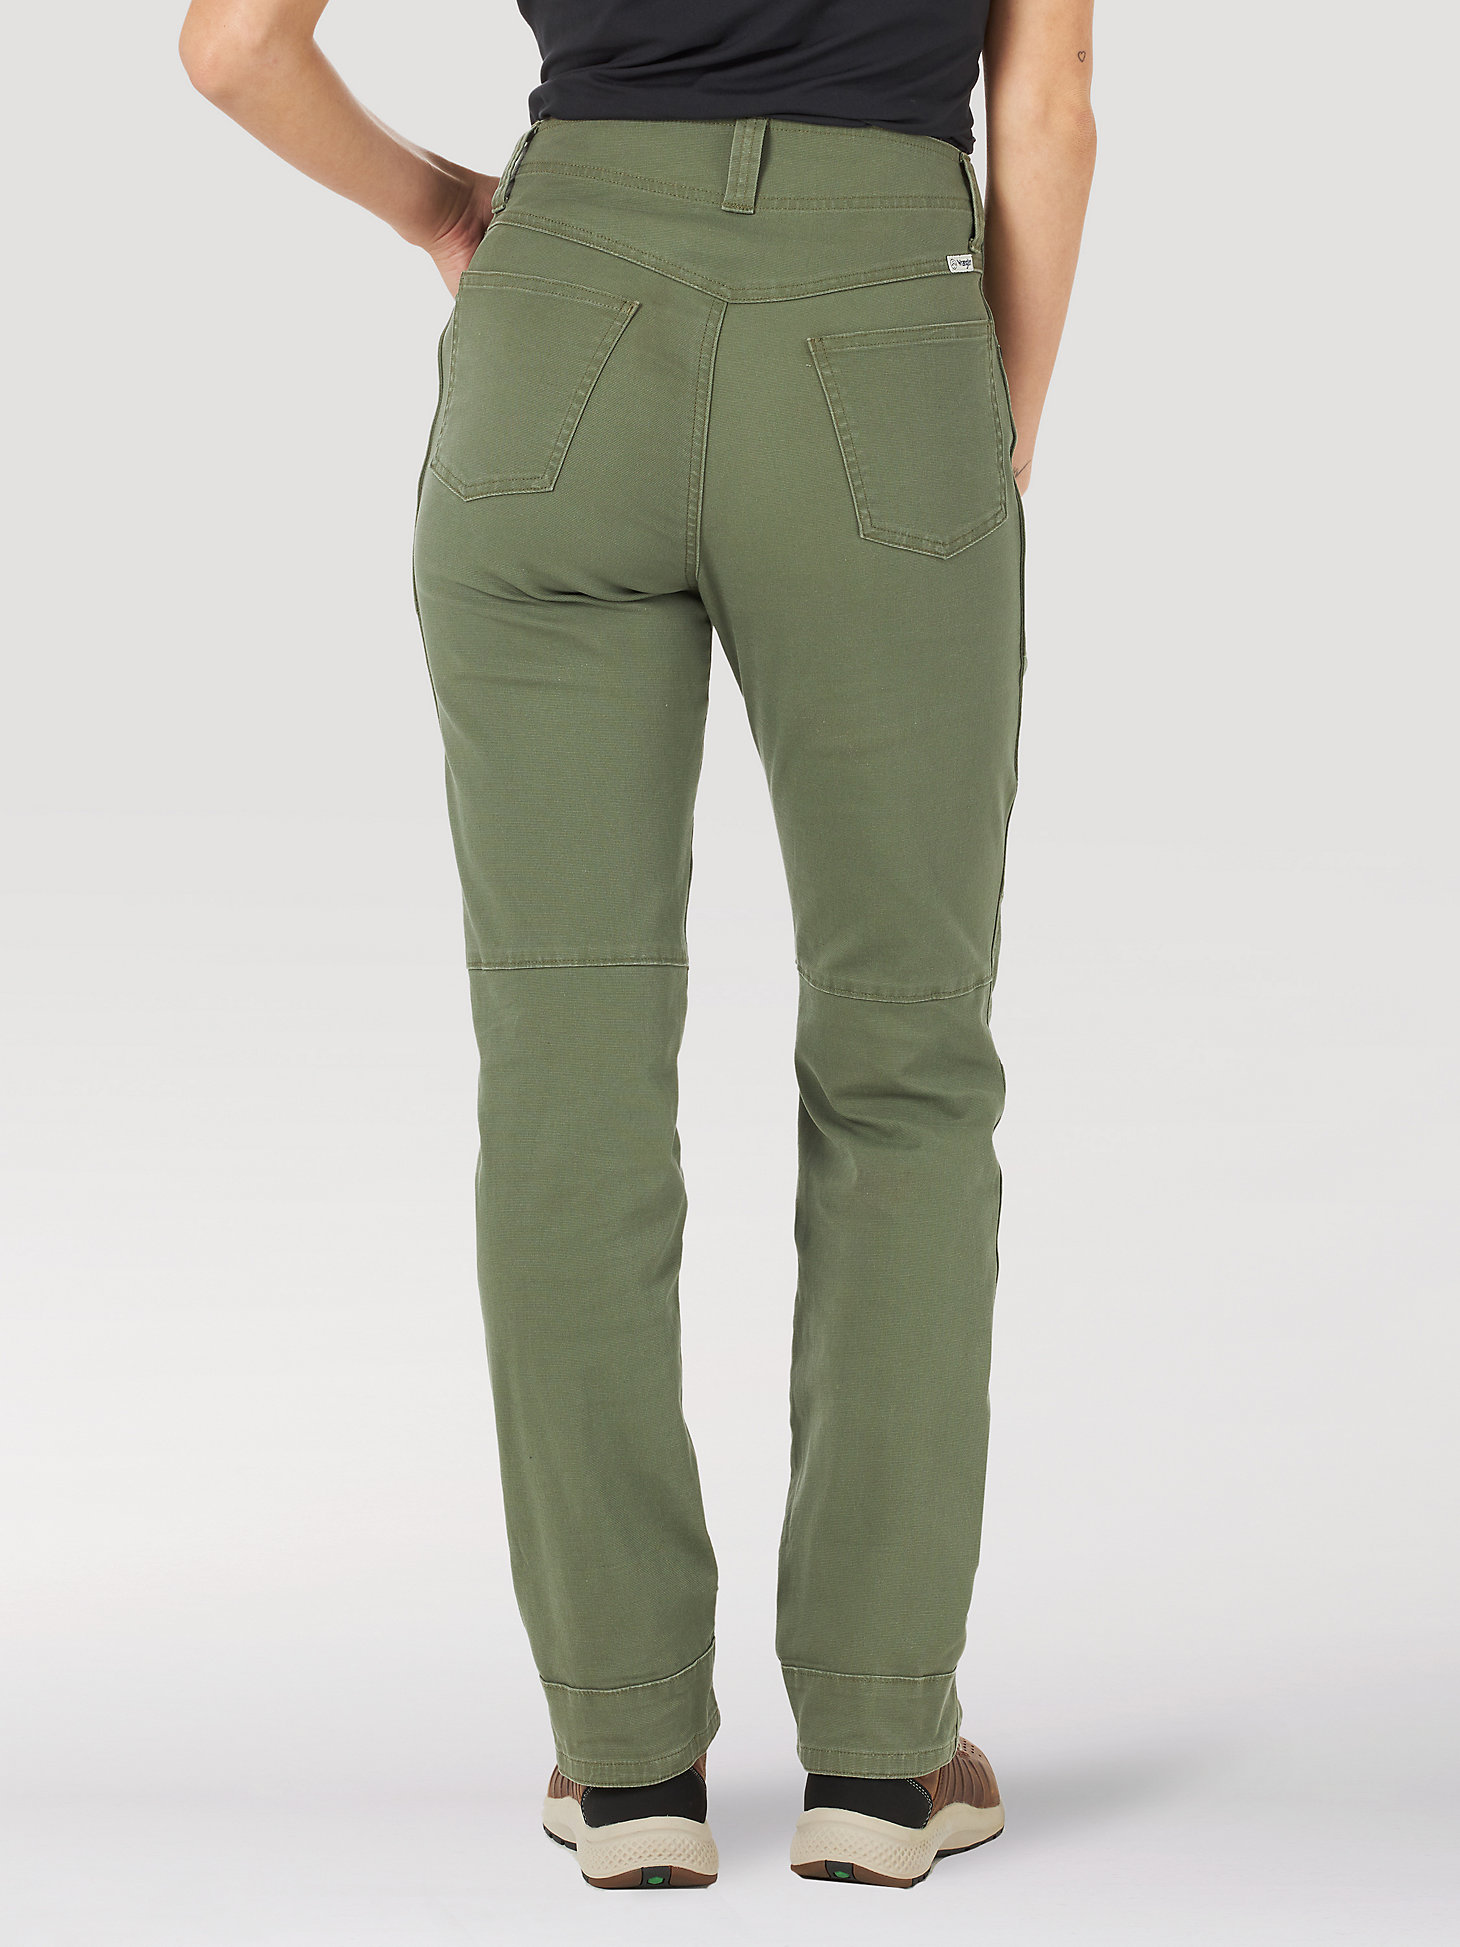 ATG By Wrangler™ Women's Canvas Pant in Olive alternative view 1